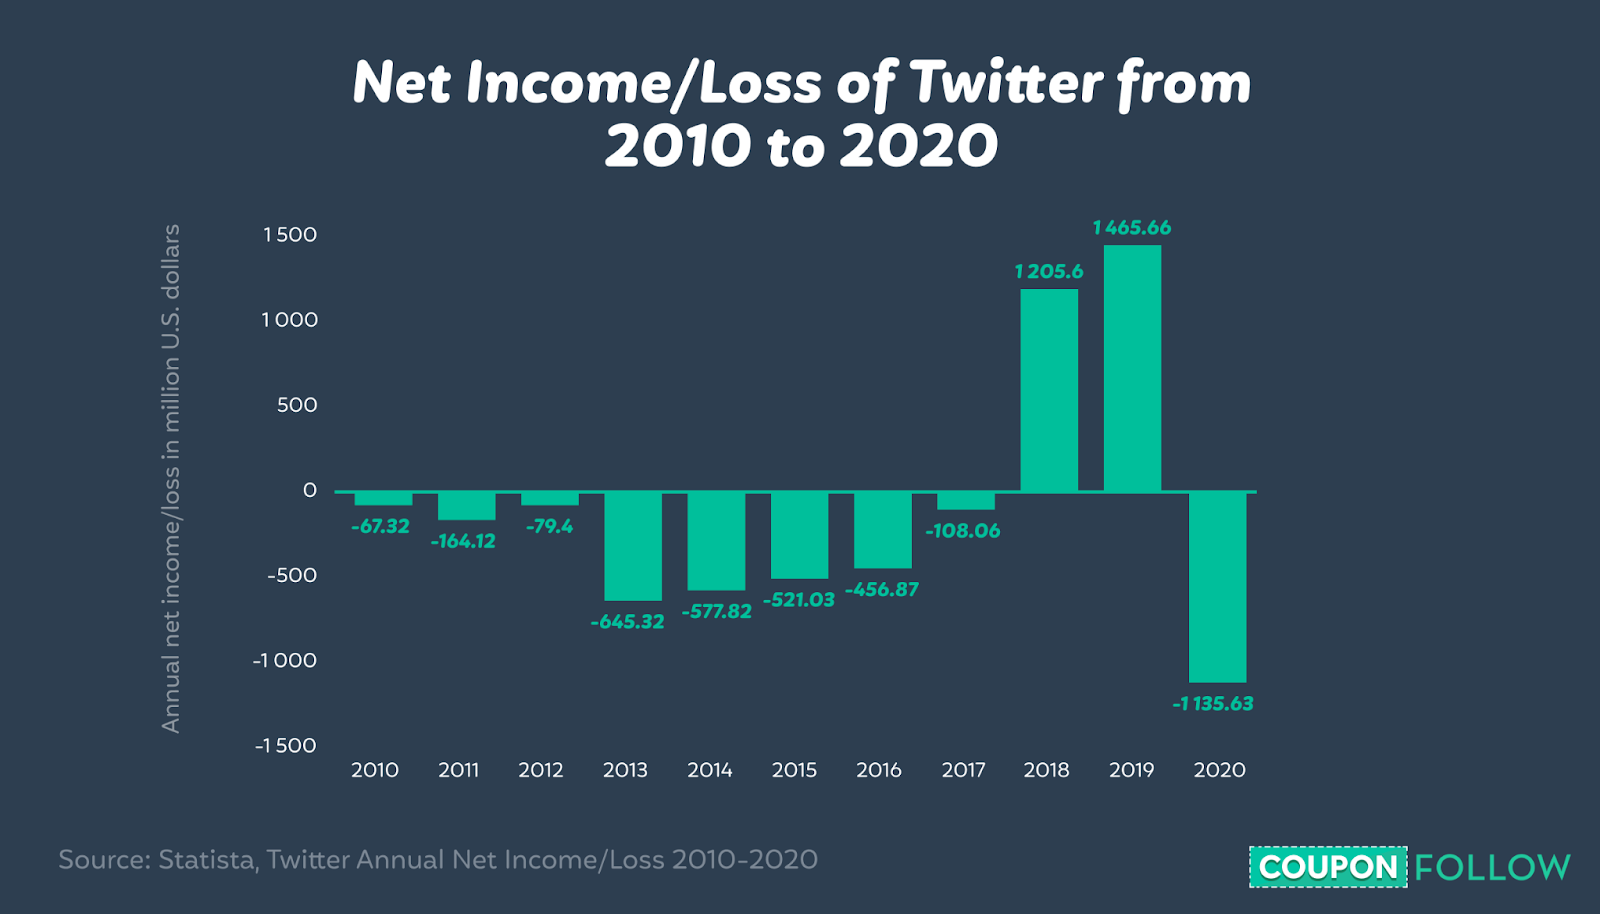 Graph depicting Twitter’s net income/loss from 2010 to 2020